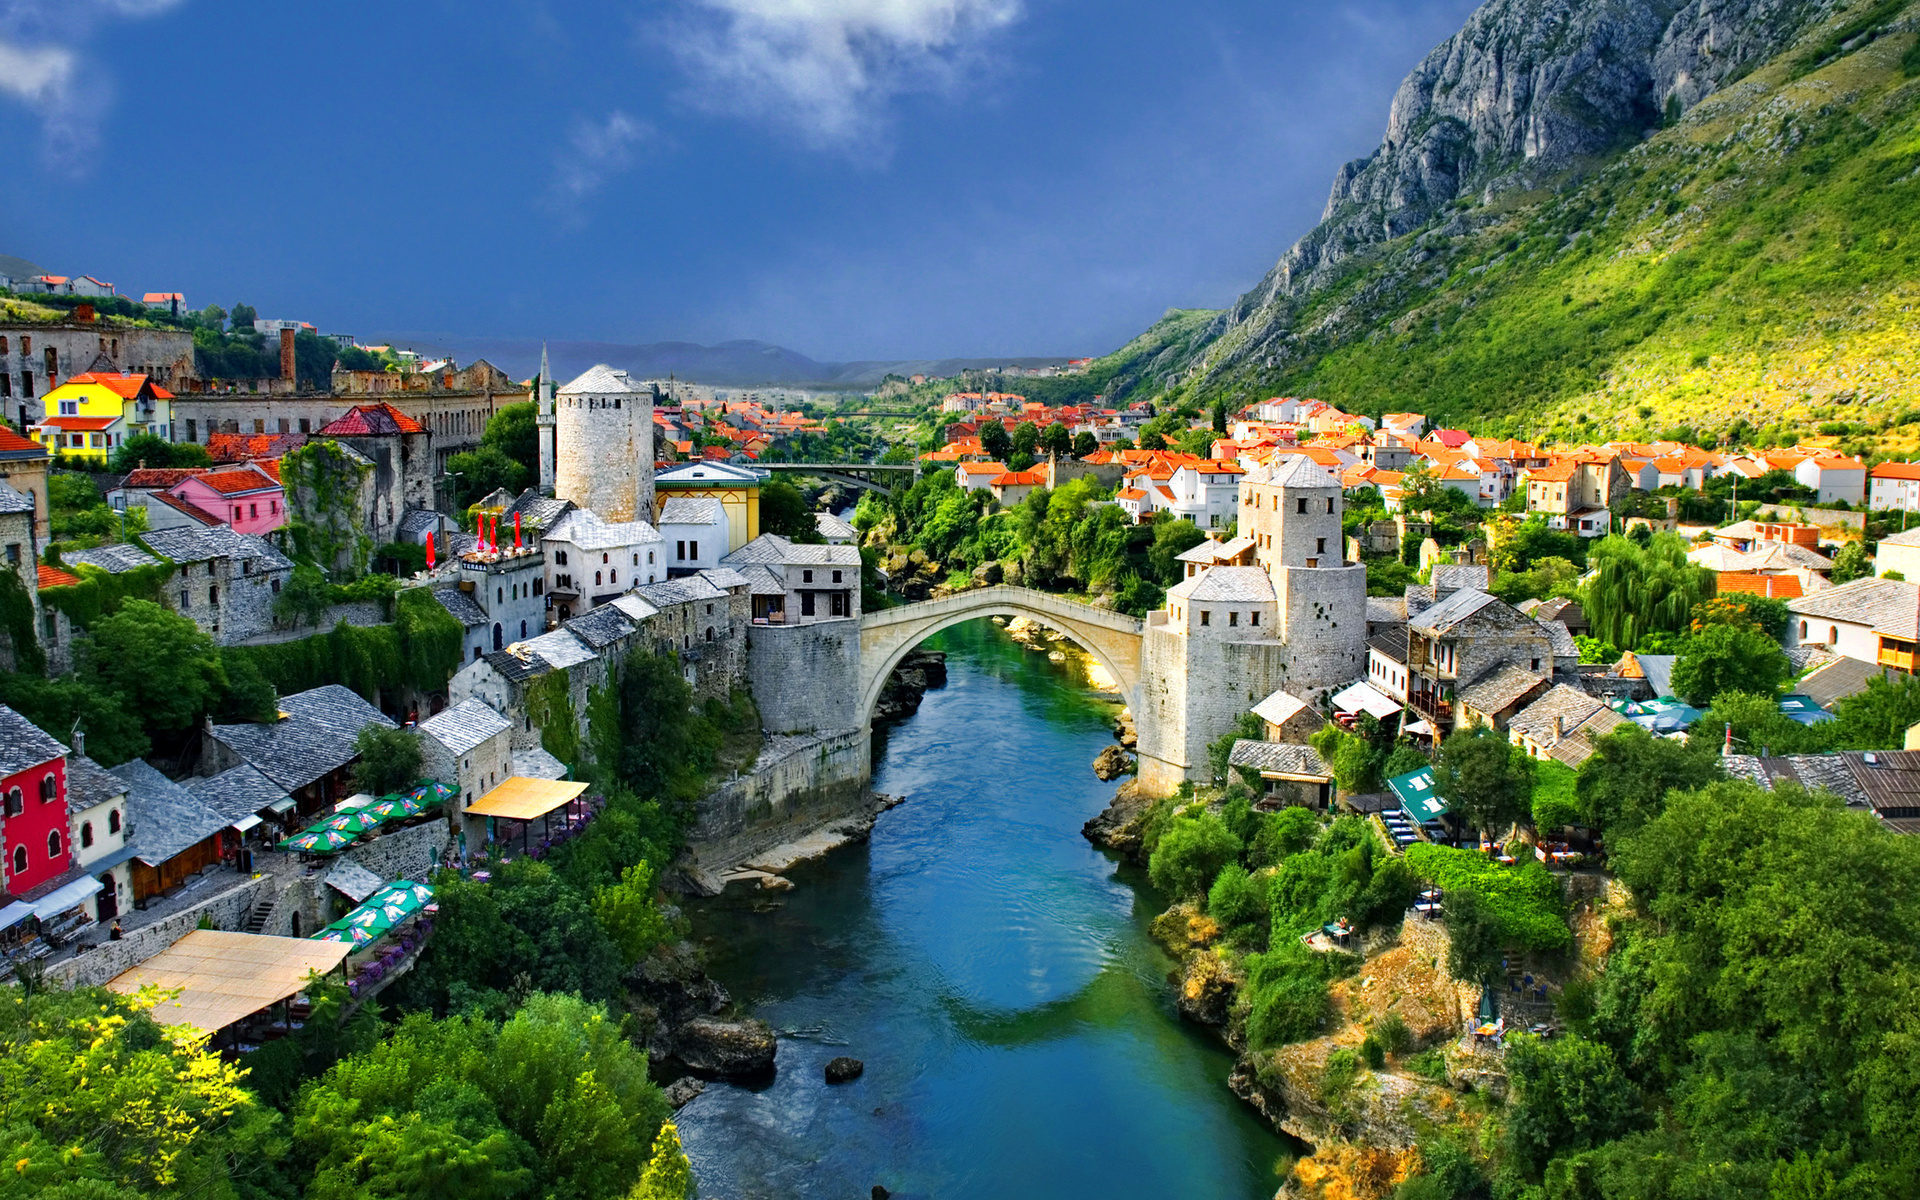 Mostar is a city and municipality in Bosnia and Herzegovina